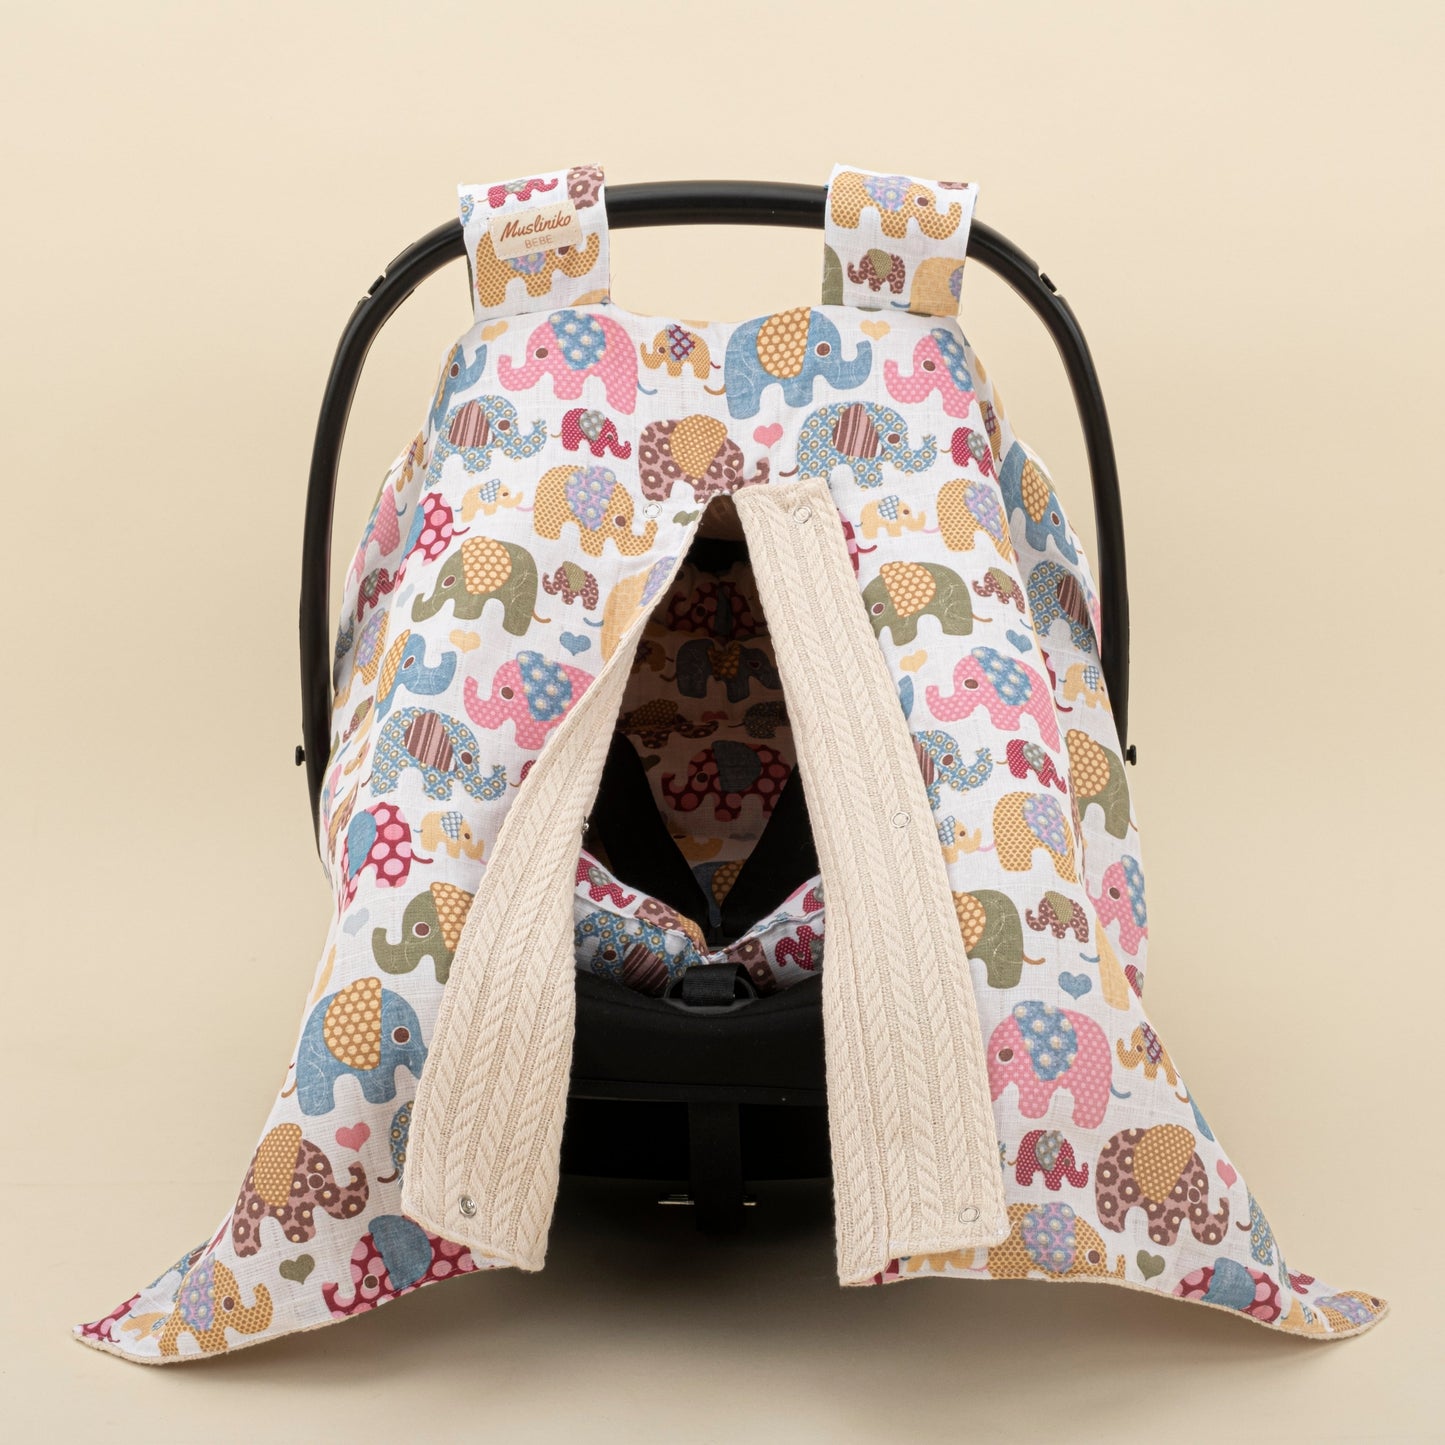 Stroller Cover Set - Double Side - Milk Brown Knitted - Colorful Elephants